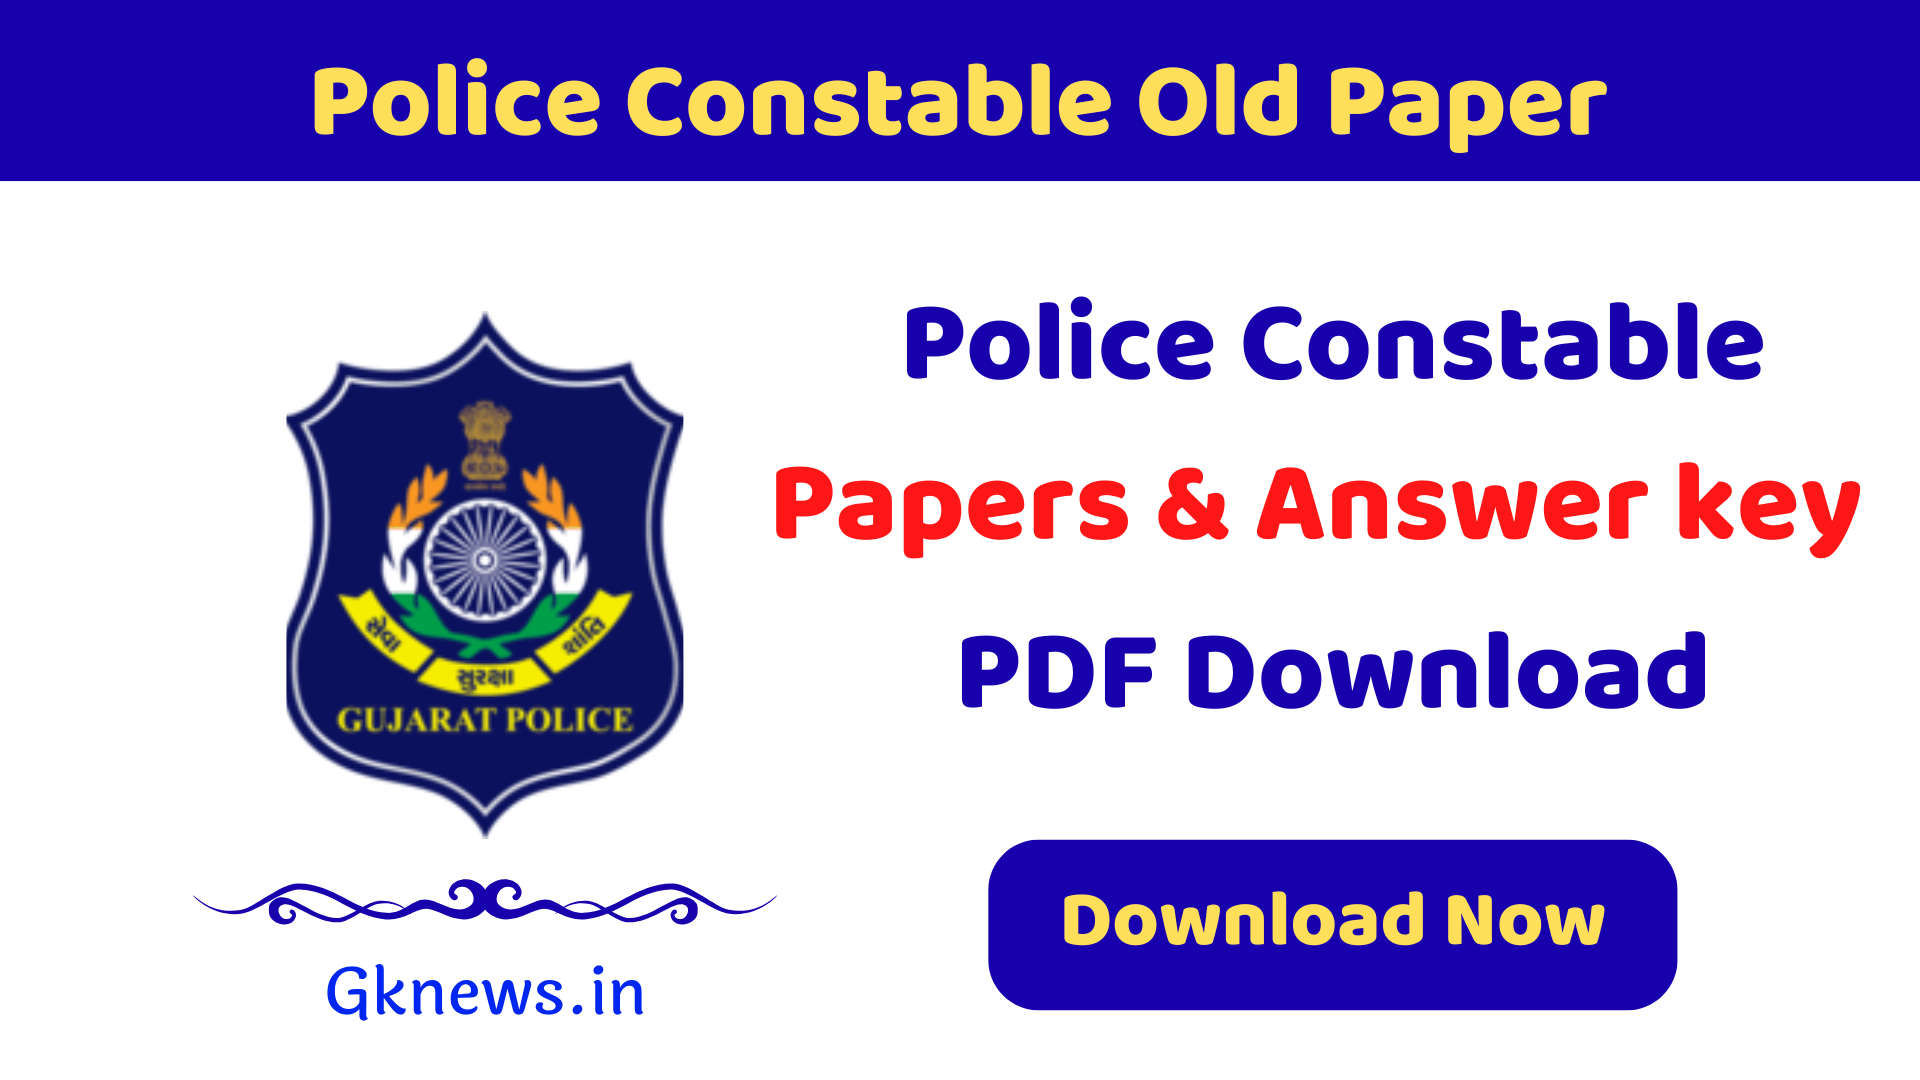 Police Constable Old Paper